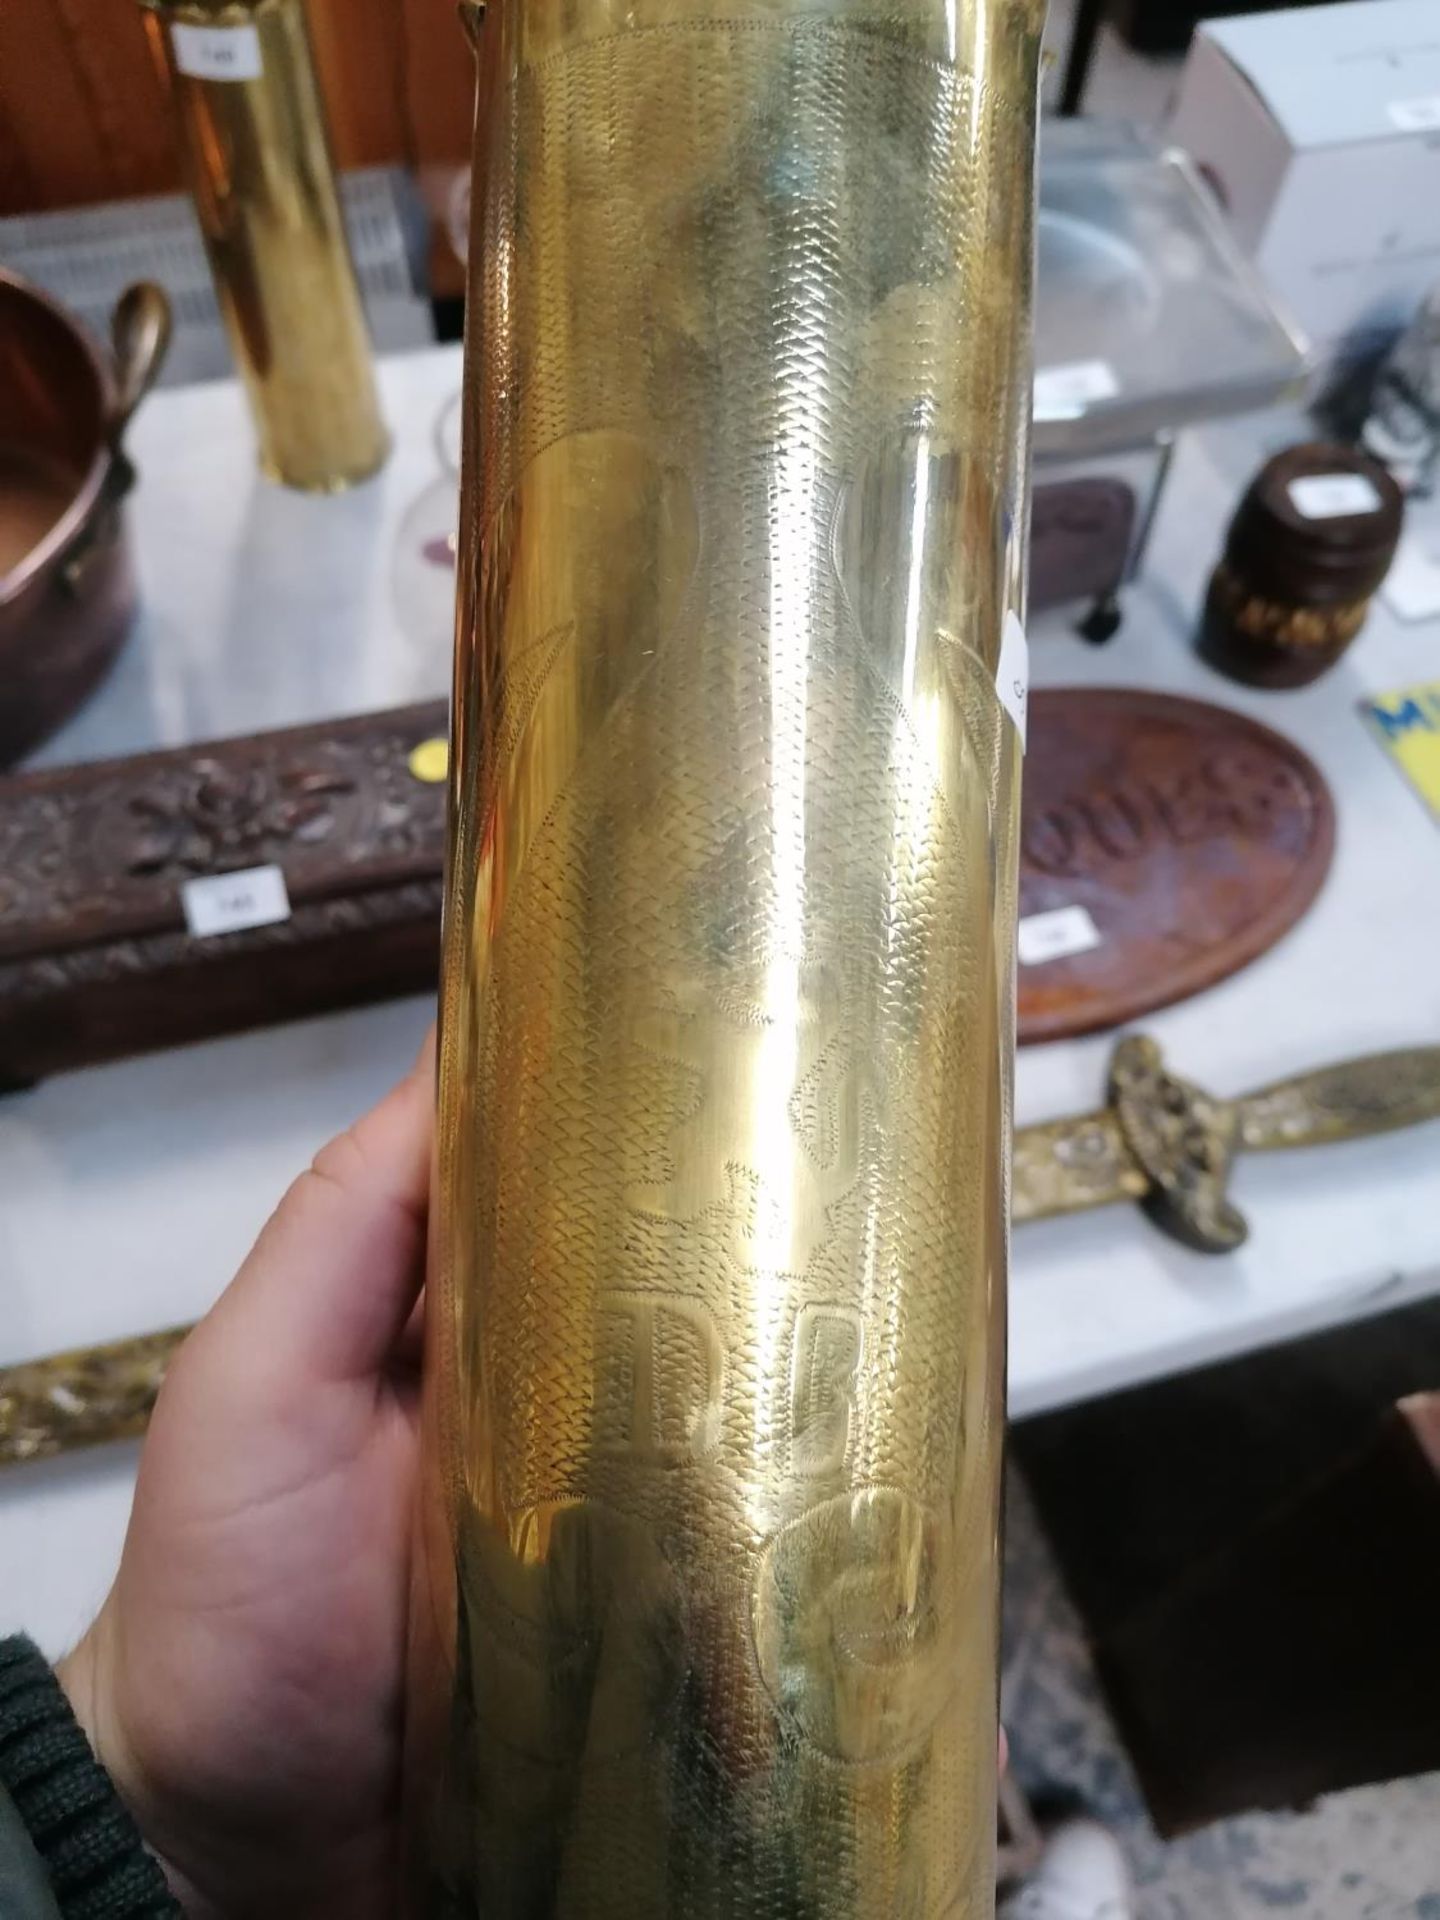 A PAIR OF VINTAGE BRASS TRENCH ART SHELLS - Image 2 of 3